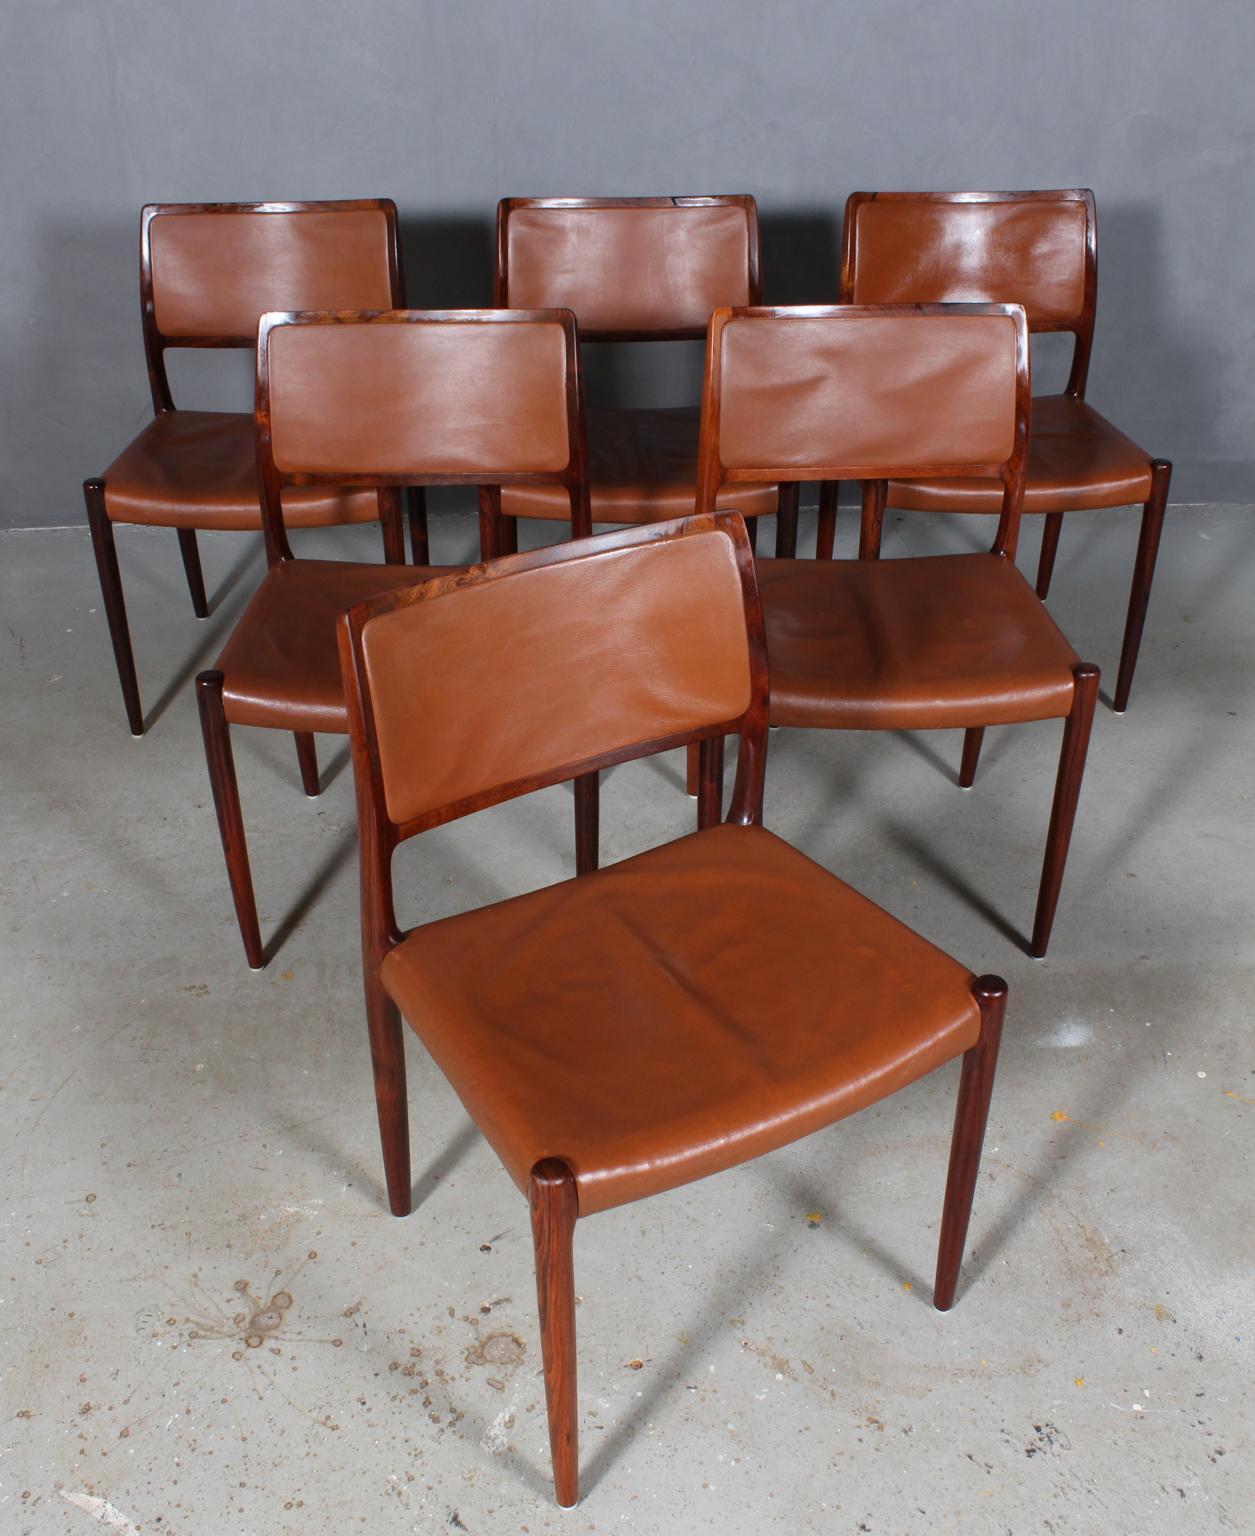 Set of six N. O. Møller dining chairs with frame of solid rosewood.

Seats original upholstered with brown leather.

Model 65, Made by J. L. Møller, Denmark, 1960s.